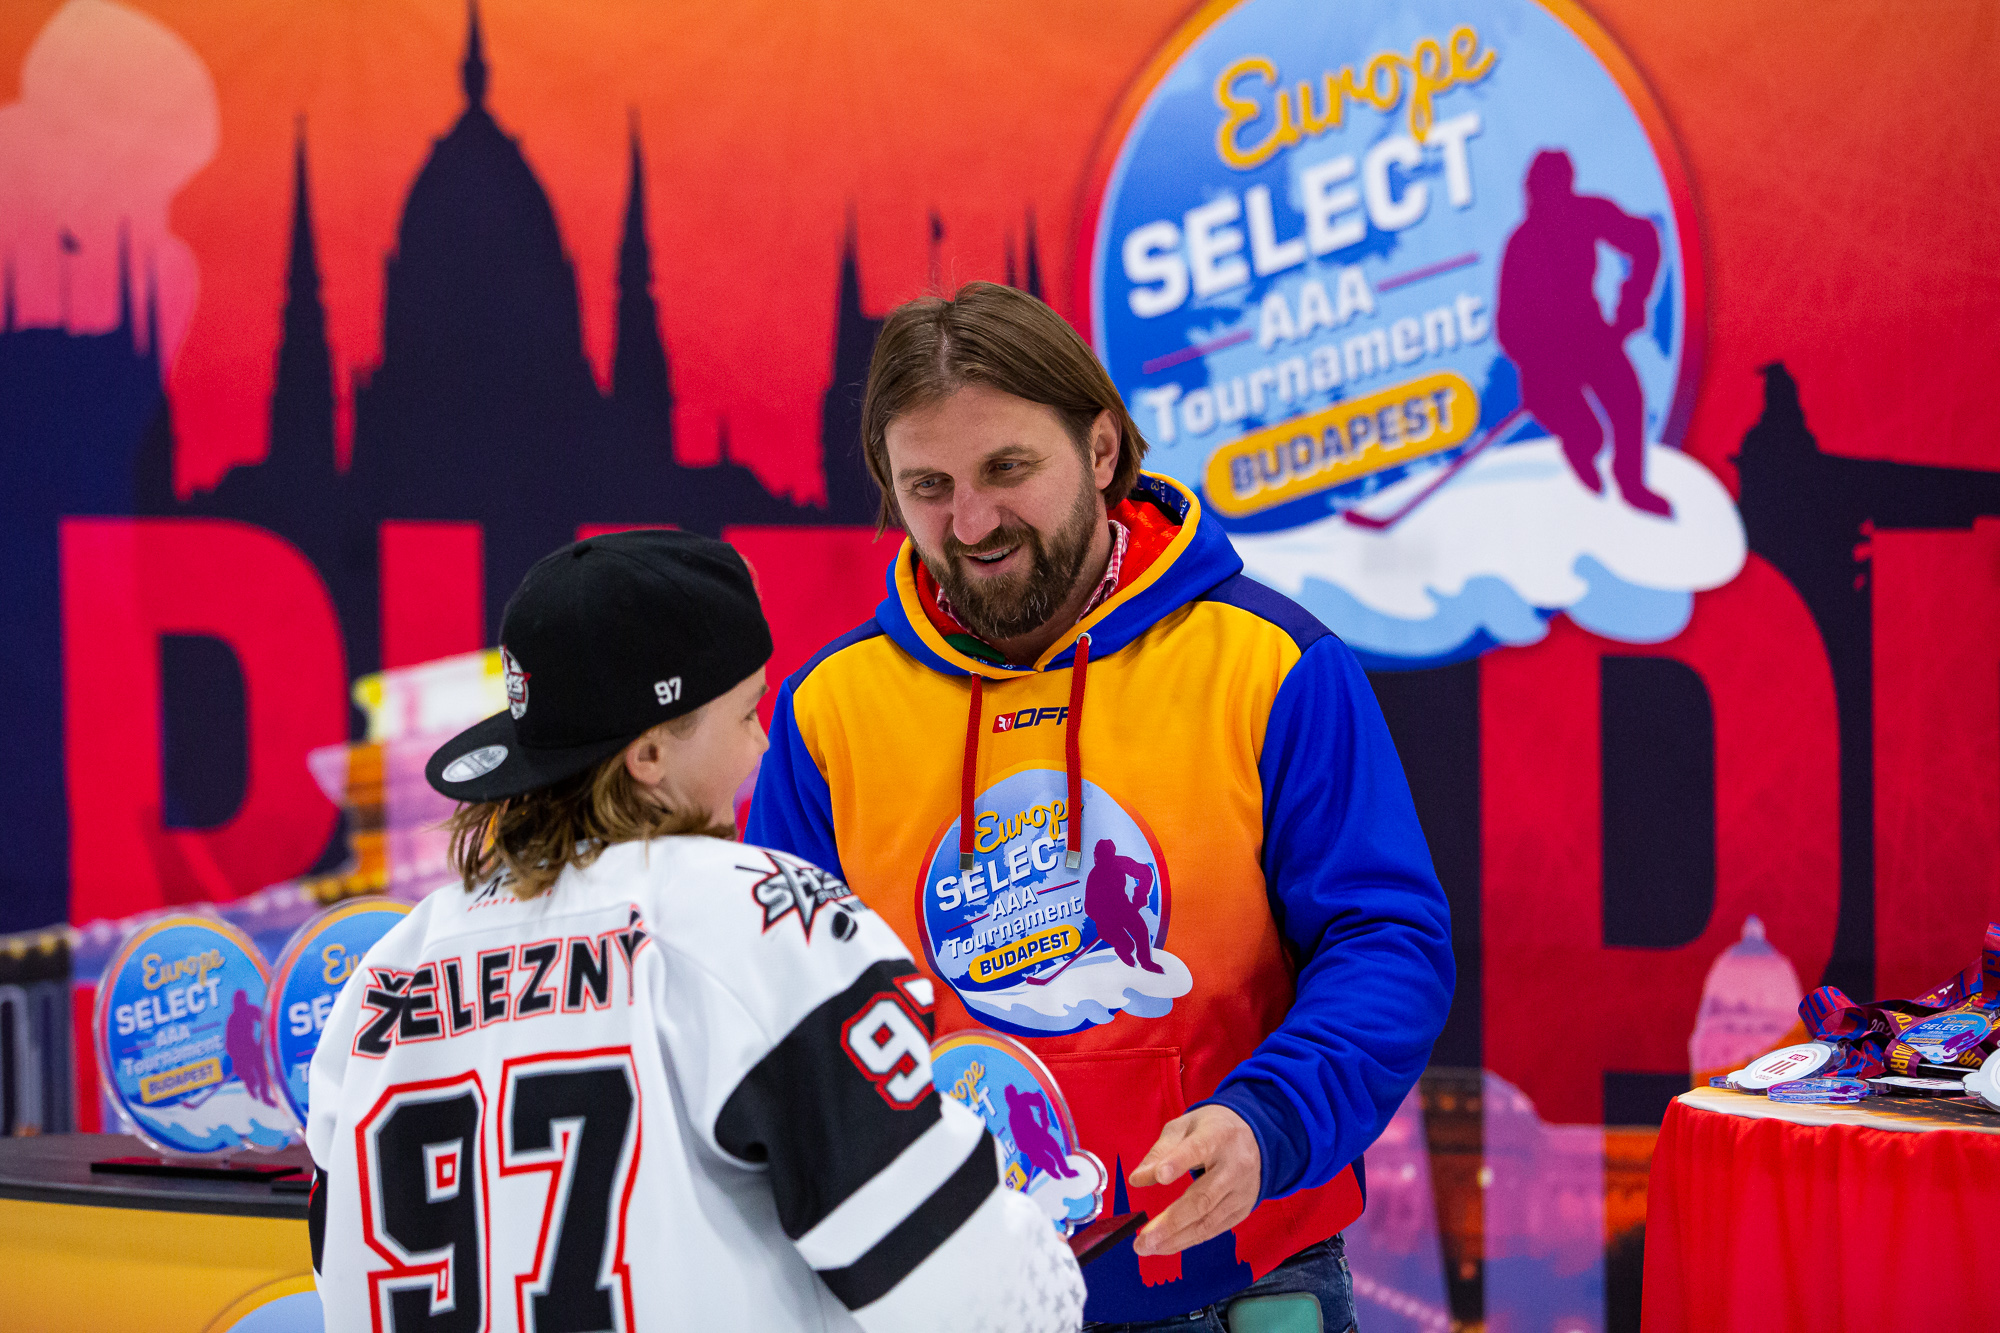 Europe Select Tournament – From nothing to the biggest!